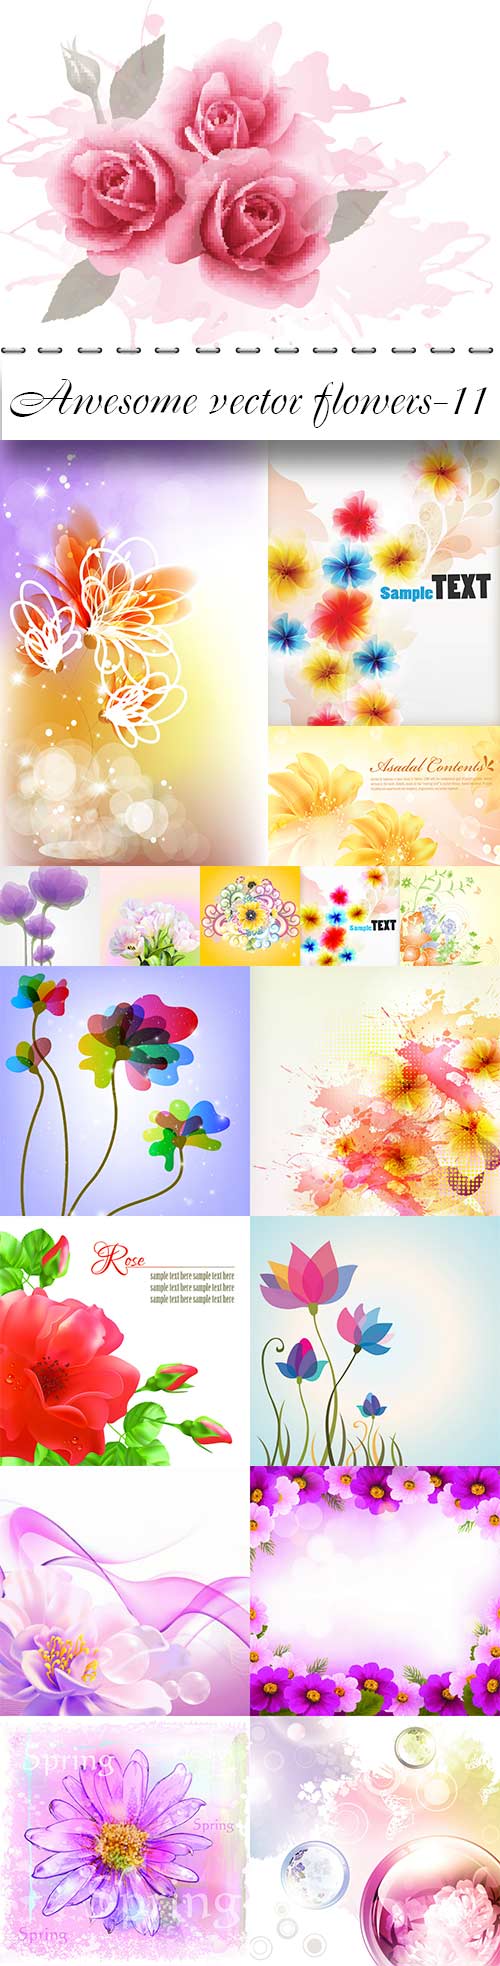 Awesome vector flowers-11